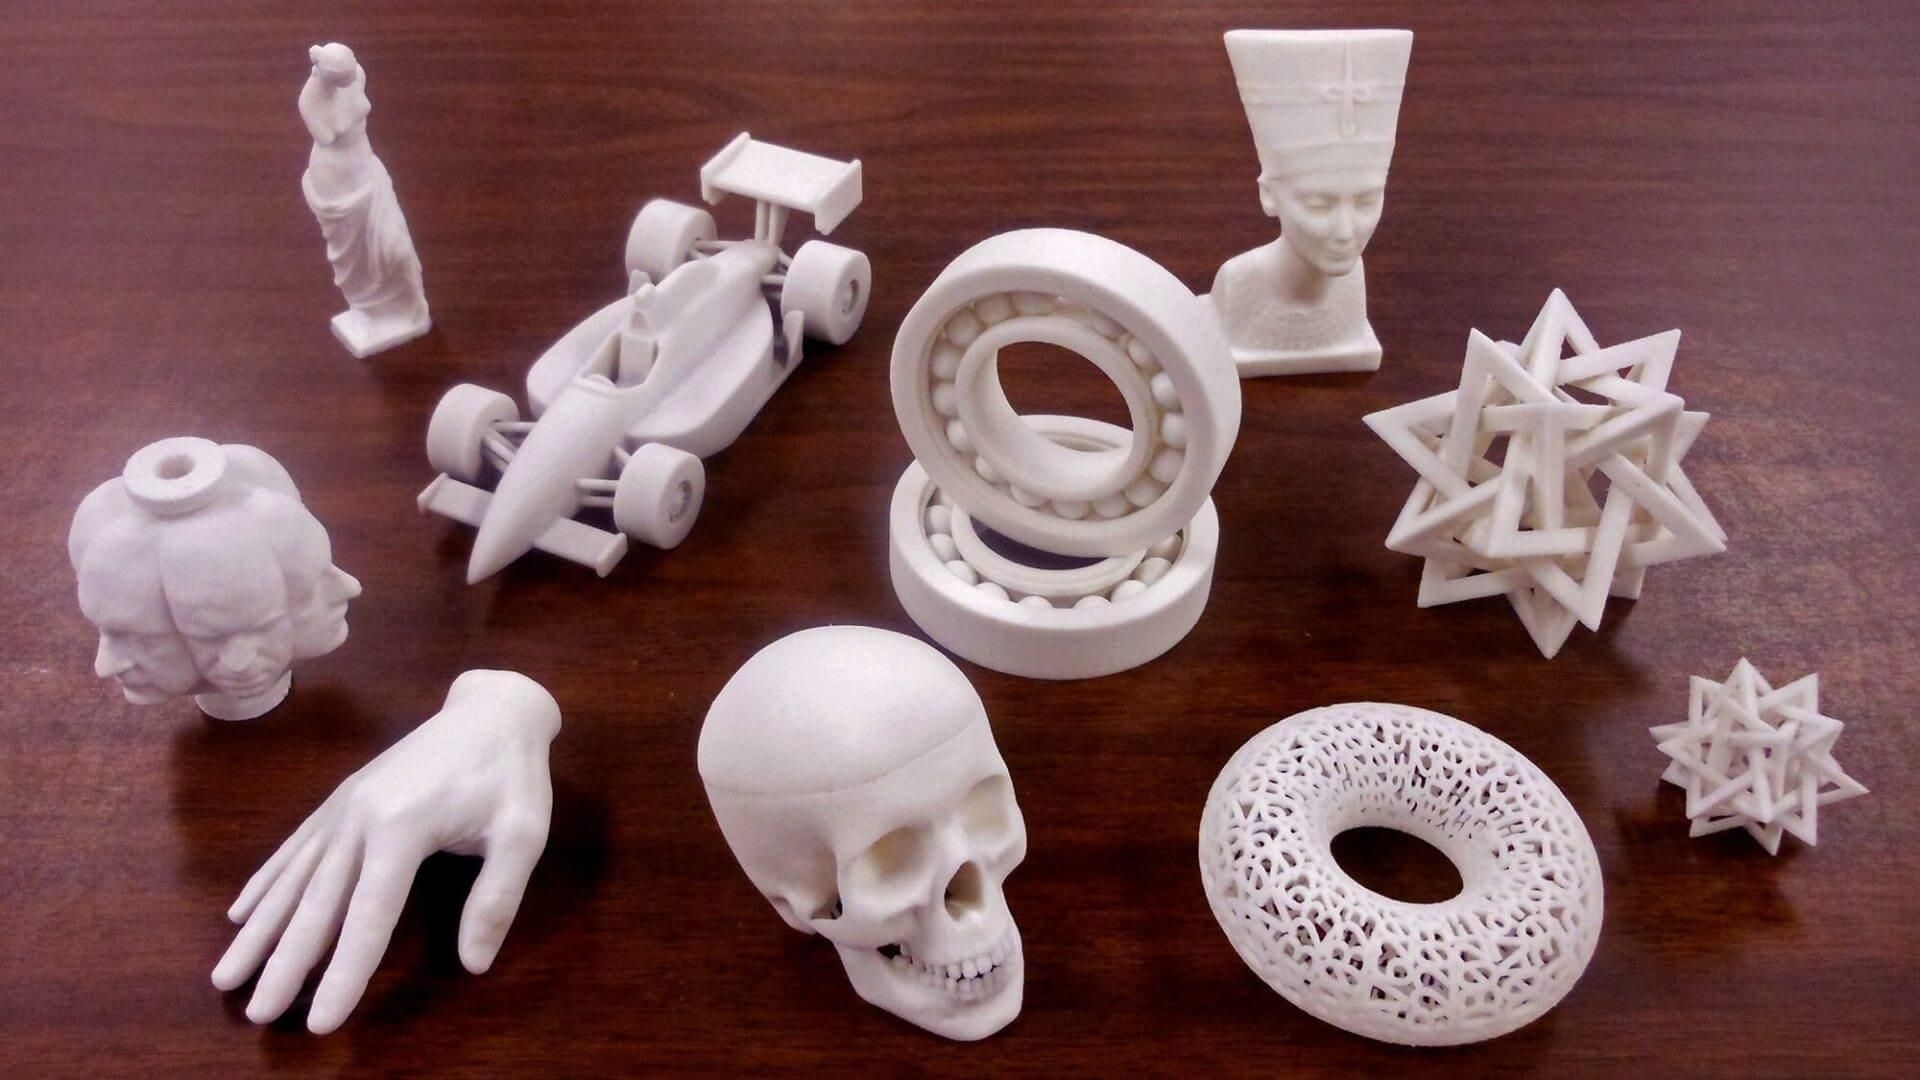 Looking For Stl File Downloads For Your 3D Printer? Here Are The 34 - Free 3D Printable Models